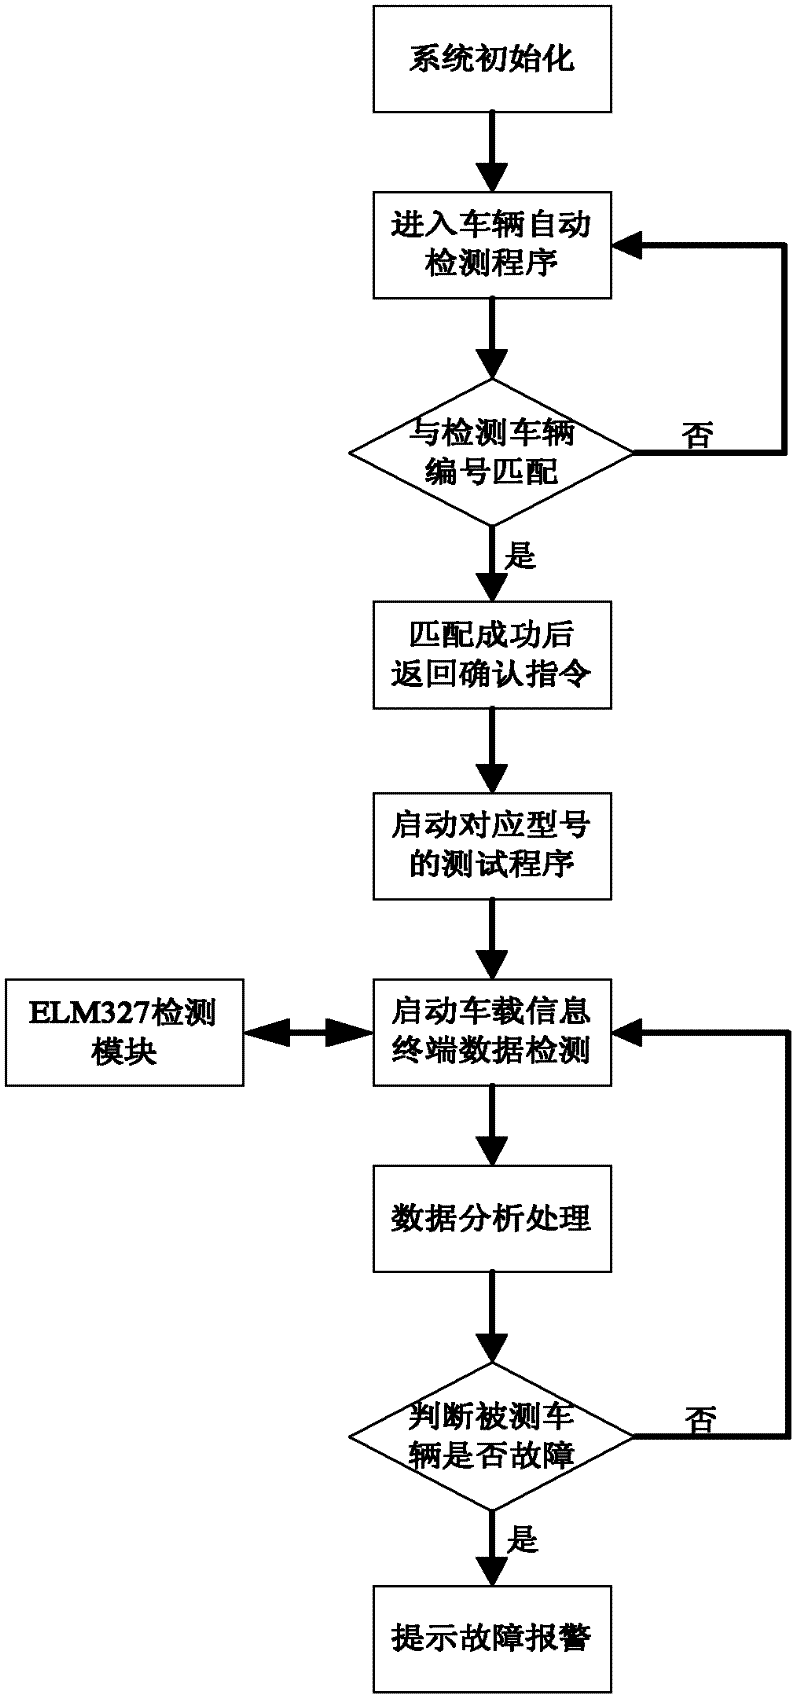 Vehicle failure remote diagnostic method based on in-vehicle information terminal